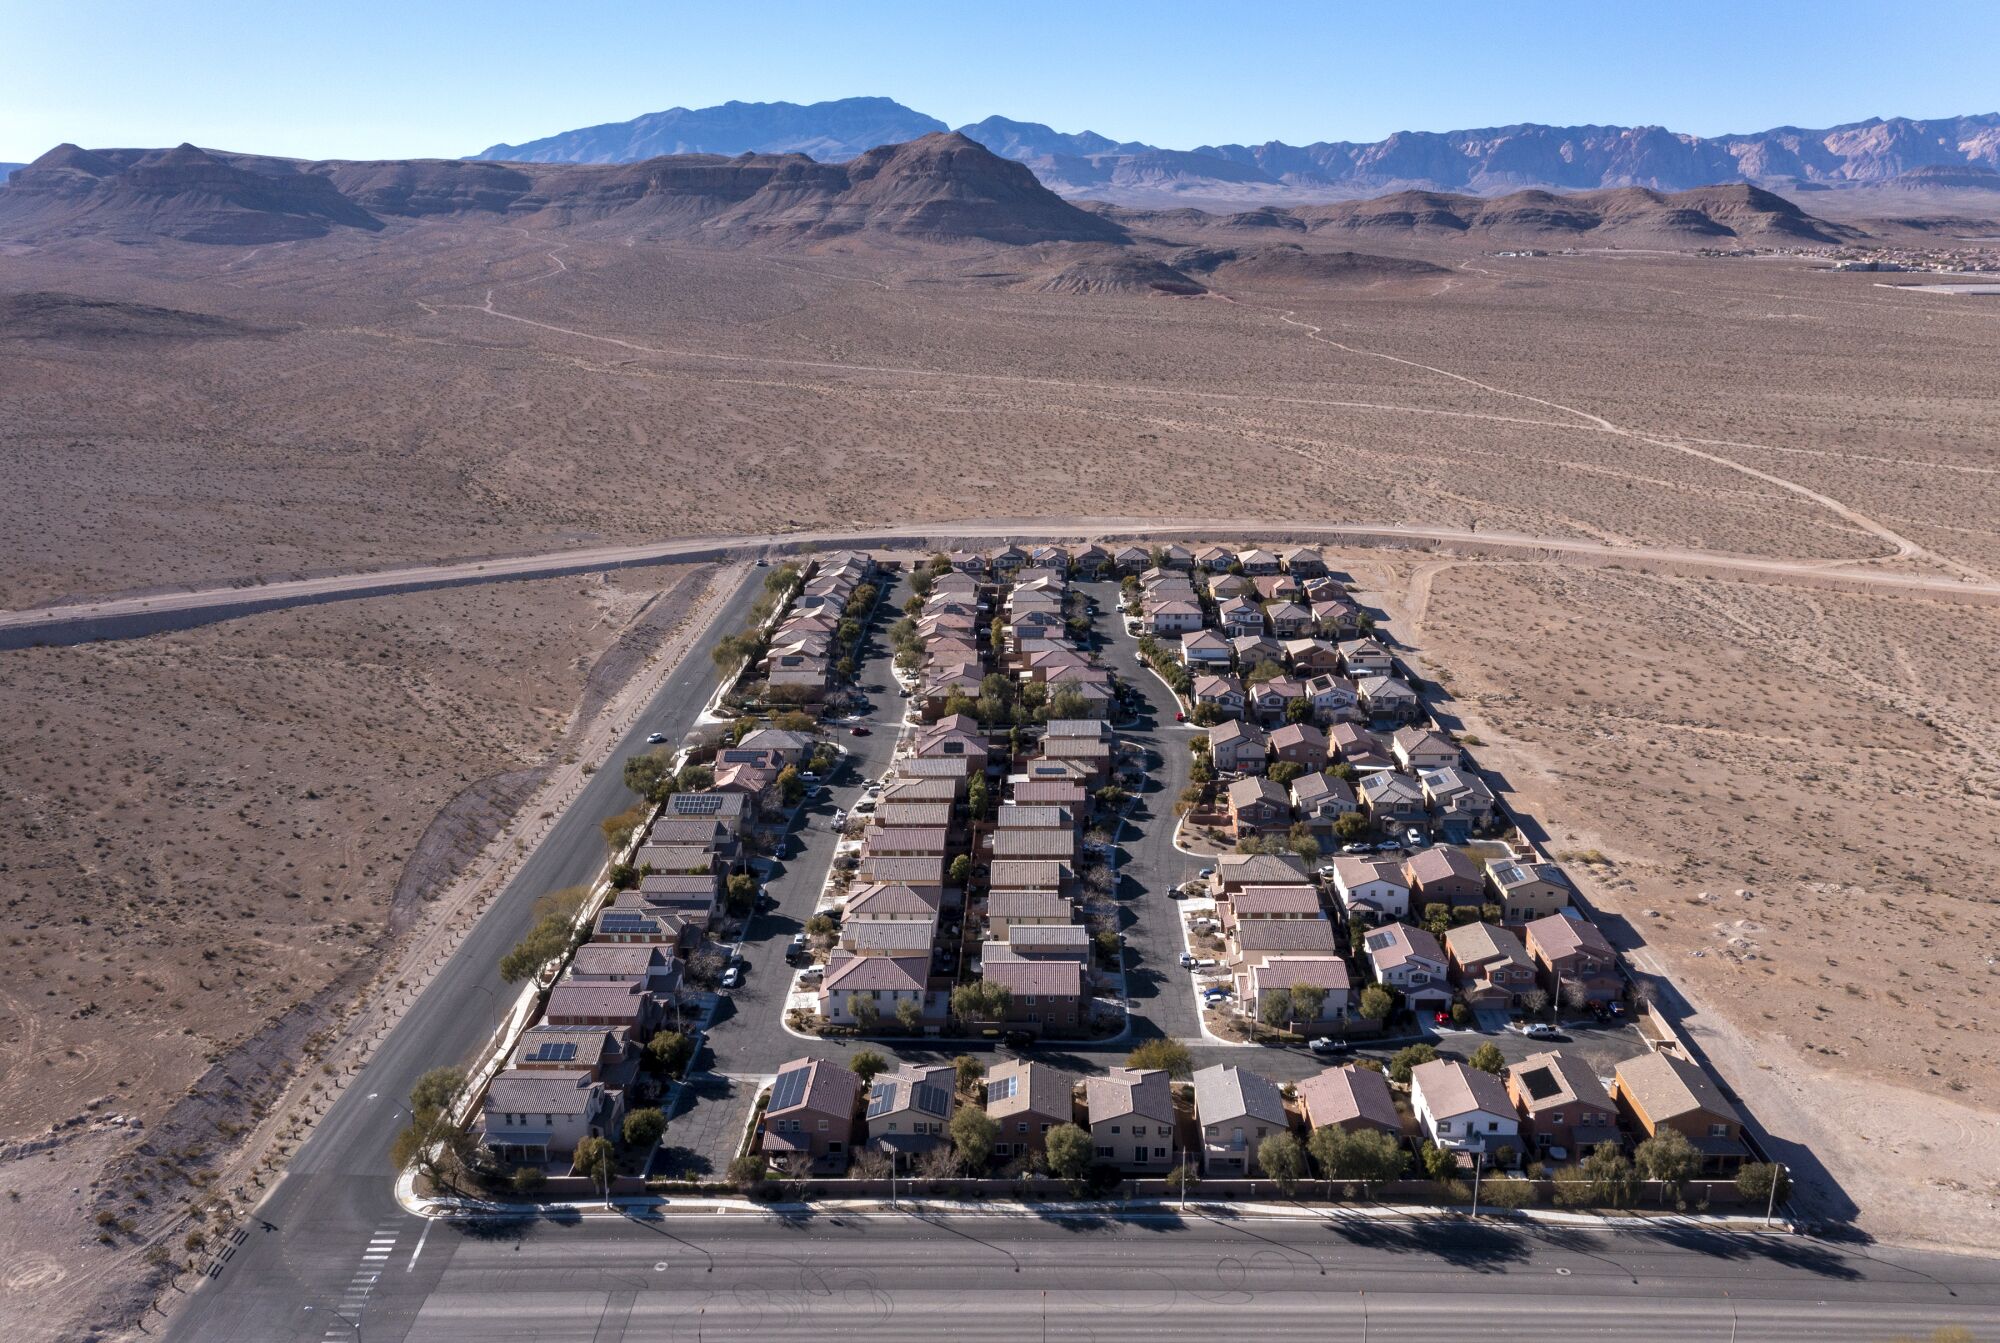 An aerial scene of a rectangular residential area surrounded by a vast desert